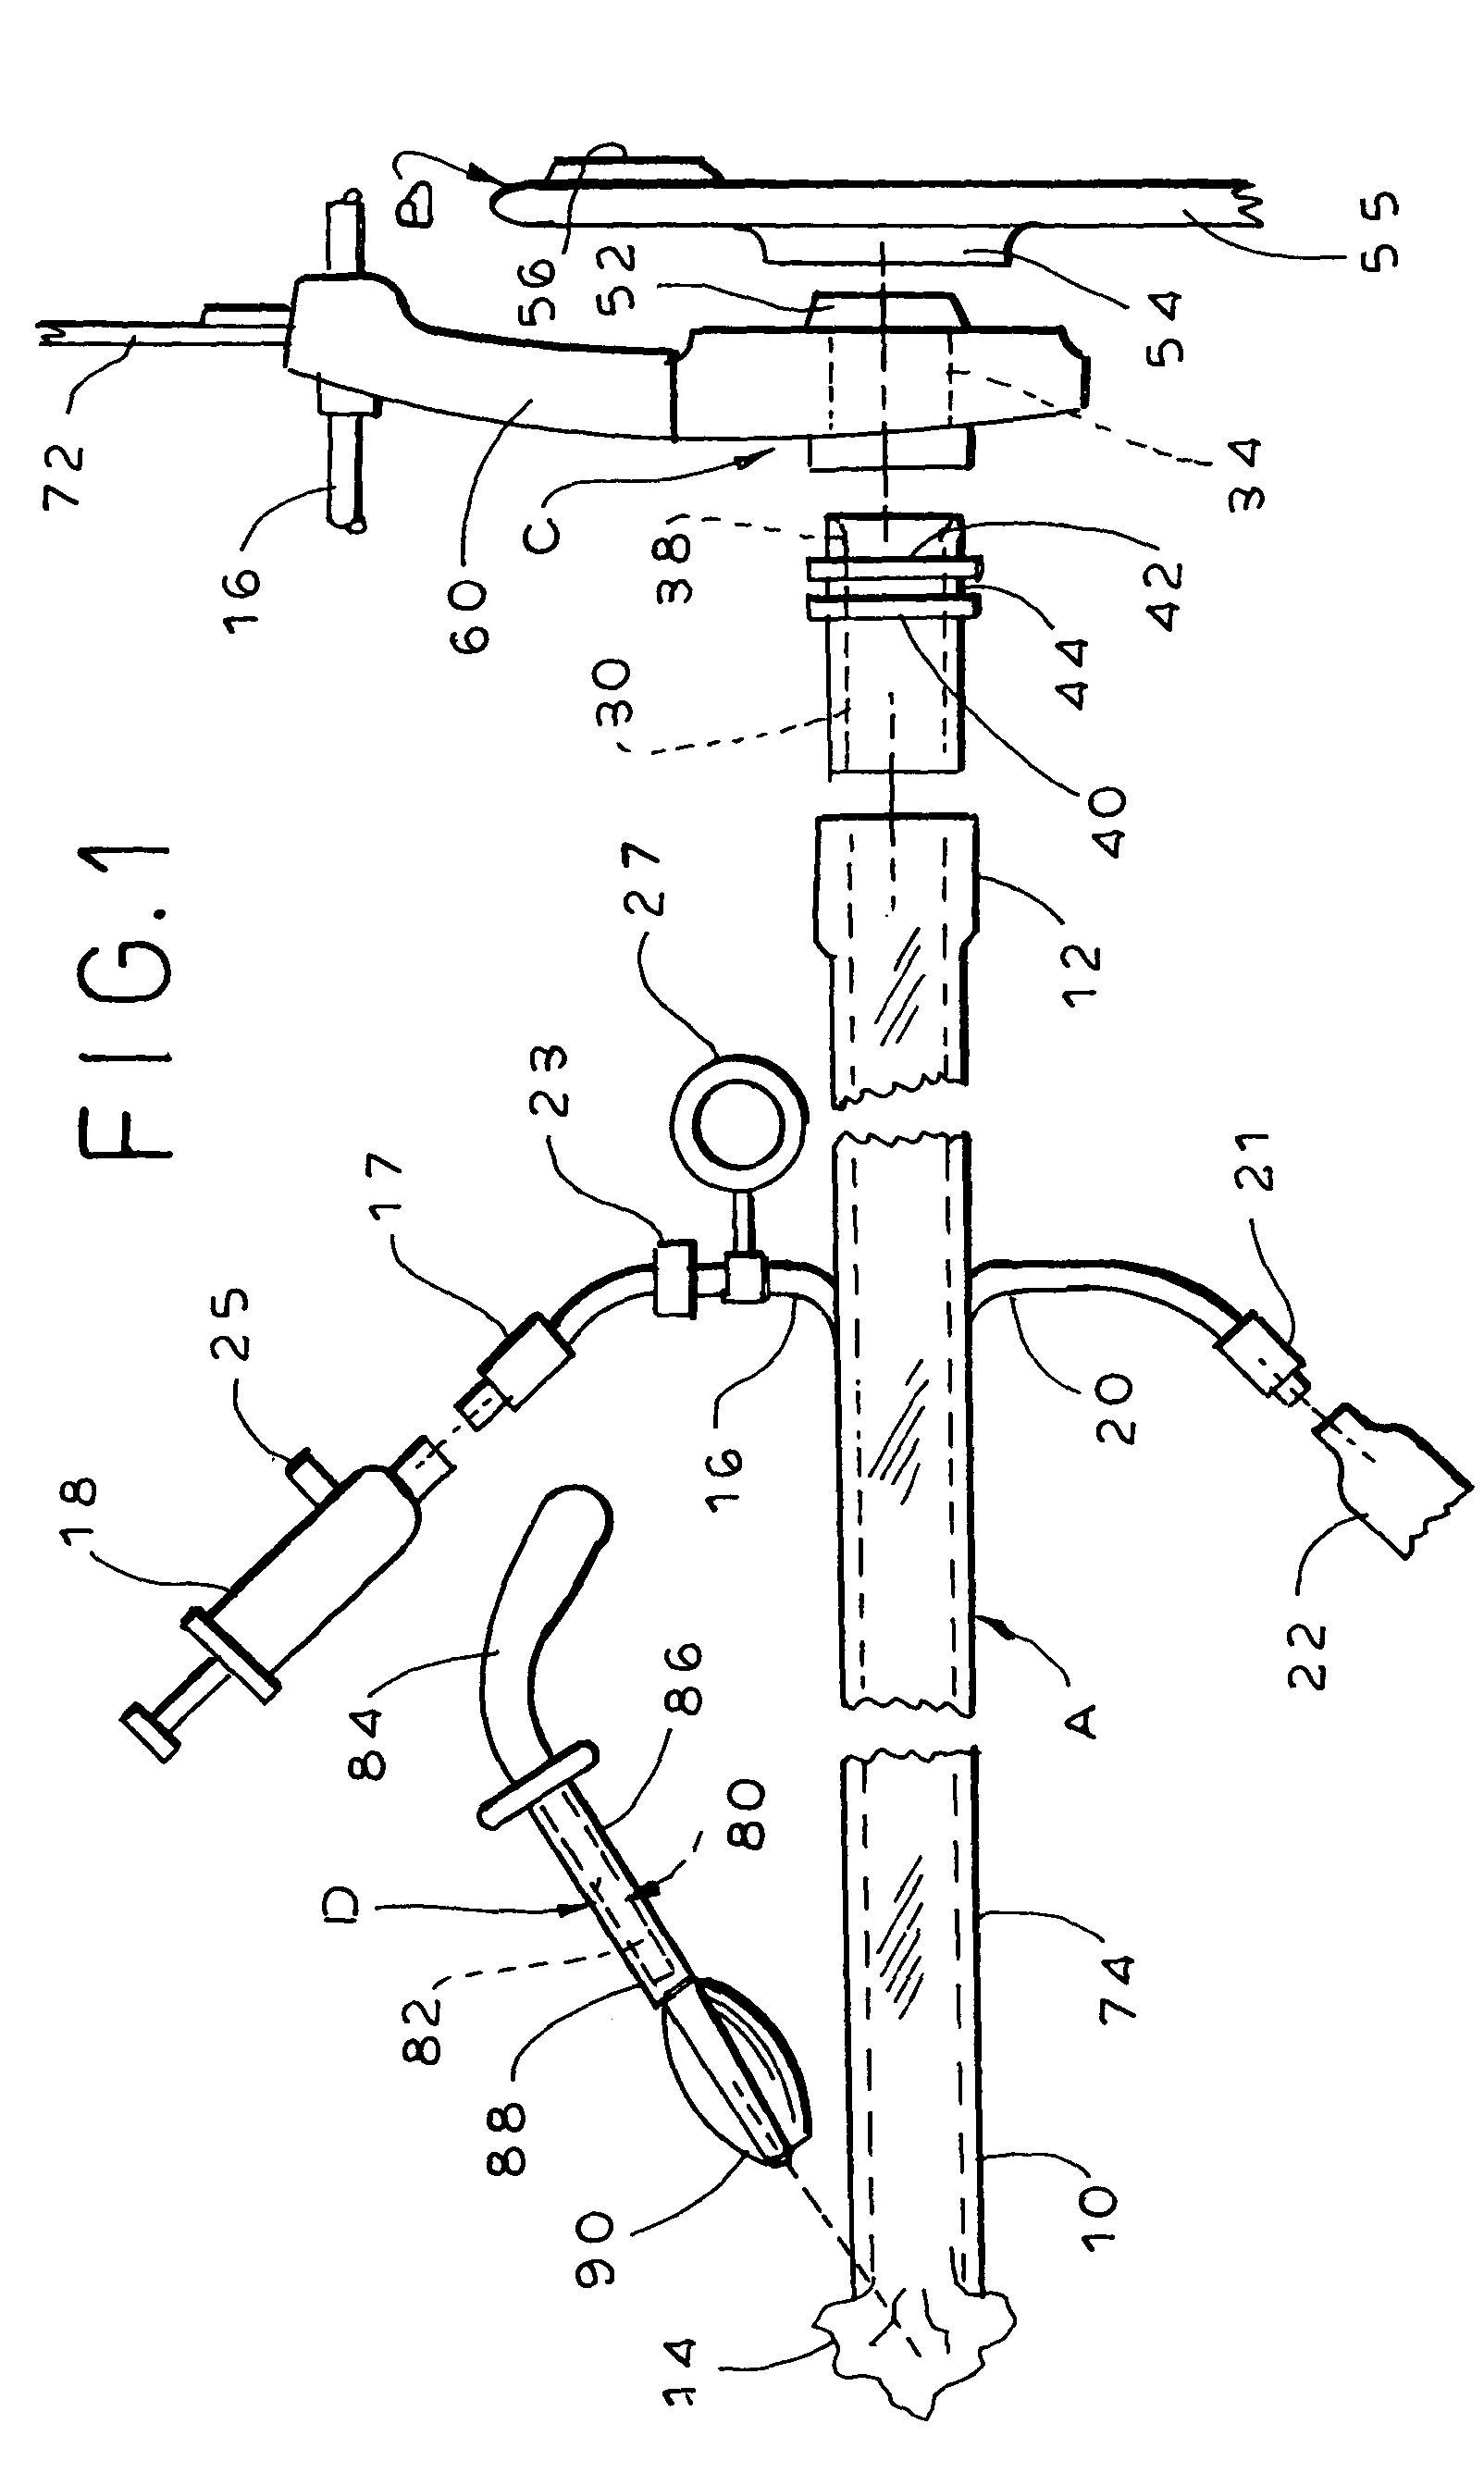 Fecal management appliance and method and apparatus for introducing same